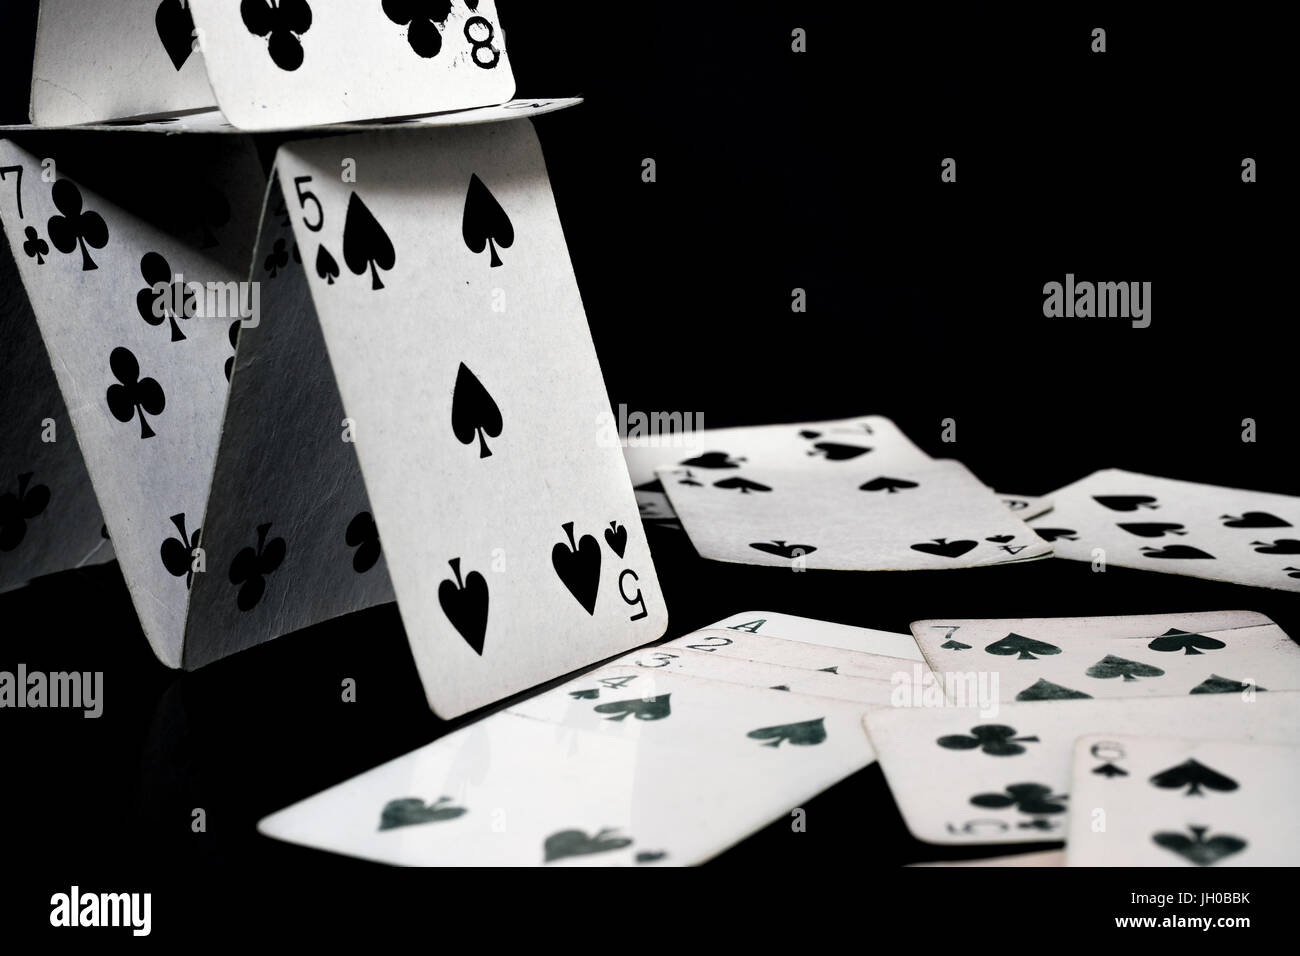 Playing cards forming a house of cards, and scattered white playing cards, black surface and background Stock Photo